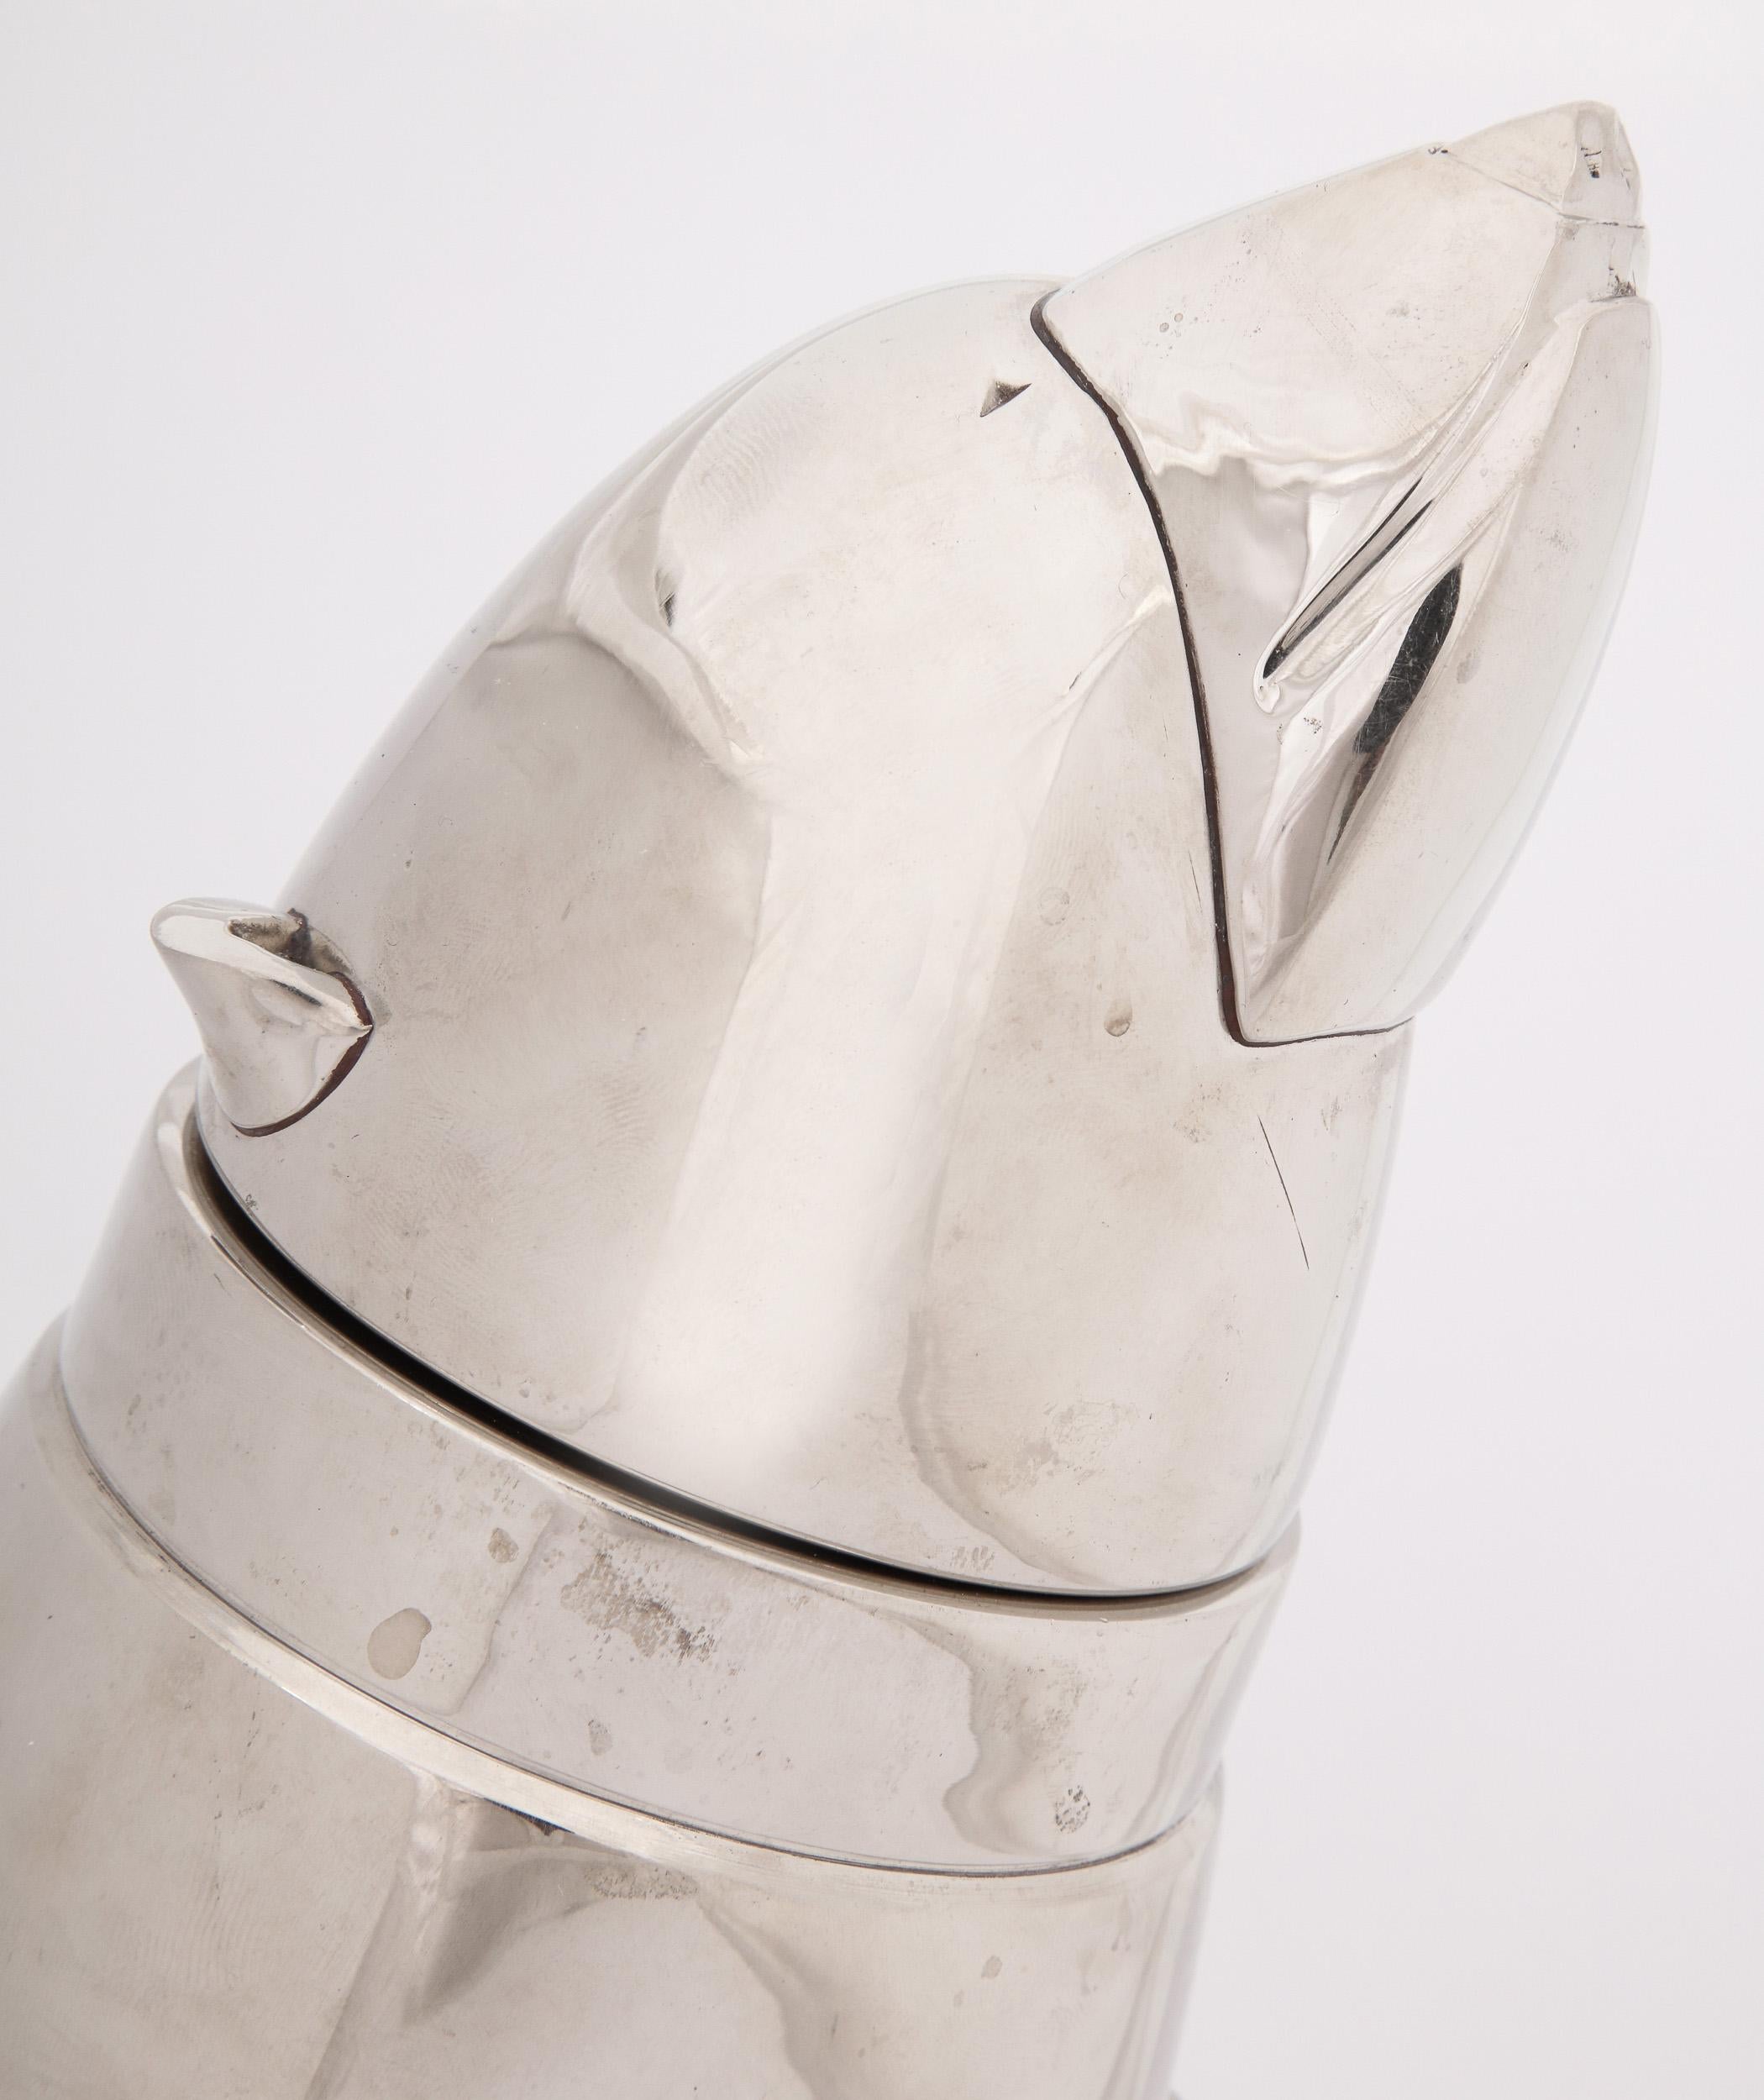 'Polar Bear' cocktail shaker,

circa 1930s.

A very heavy gauge, silver plated cocktail shaker in the form of a polar bear, the head removing to reveal the strainer.

Good condition. Normal wear consistent with age and use. 

Measures: 10.5